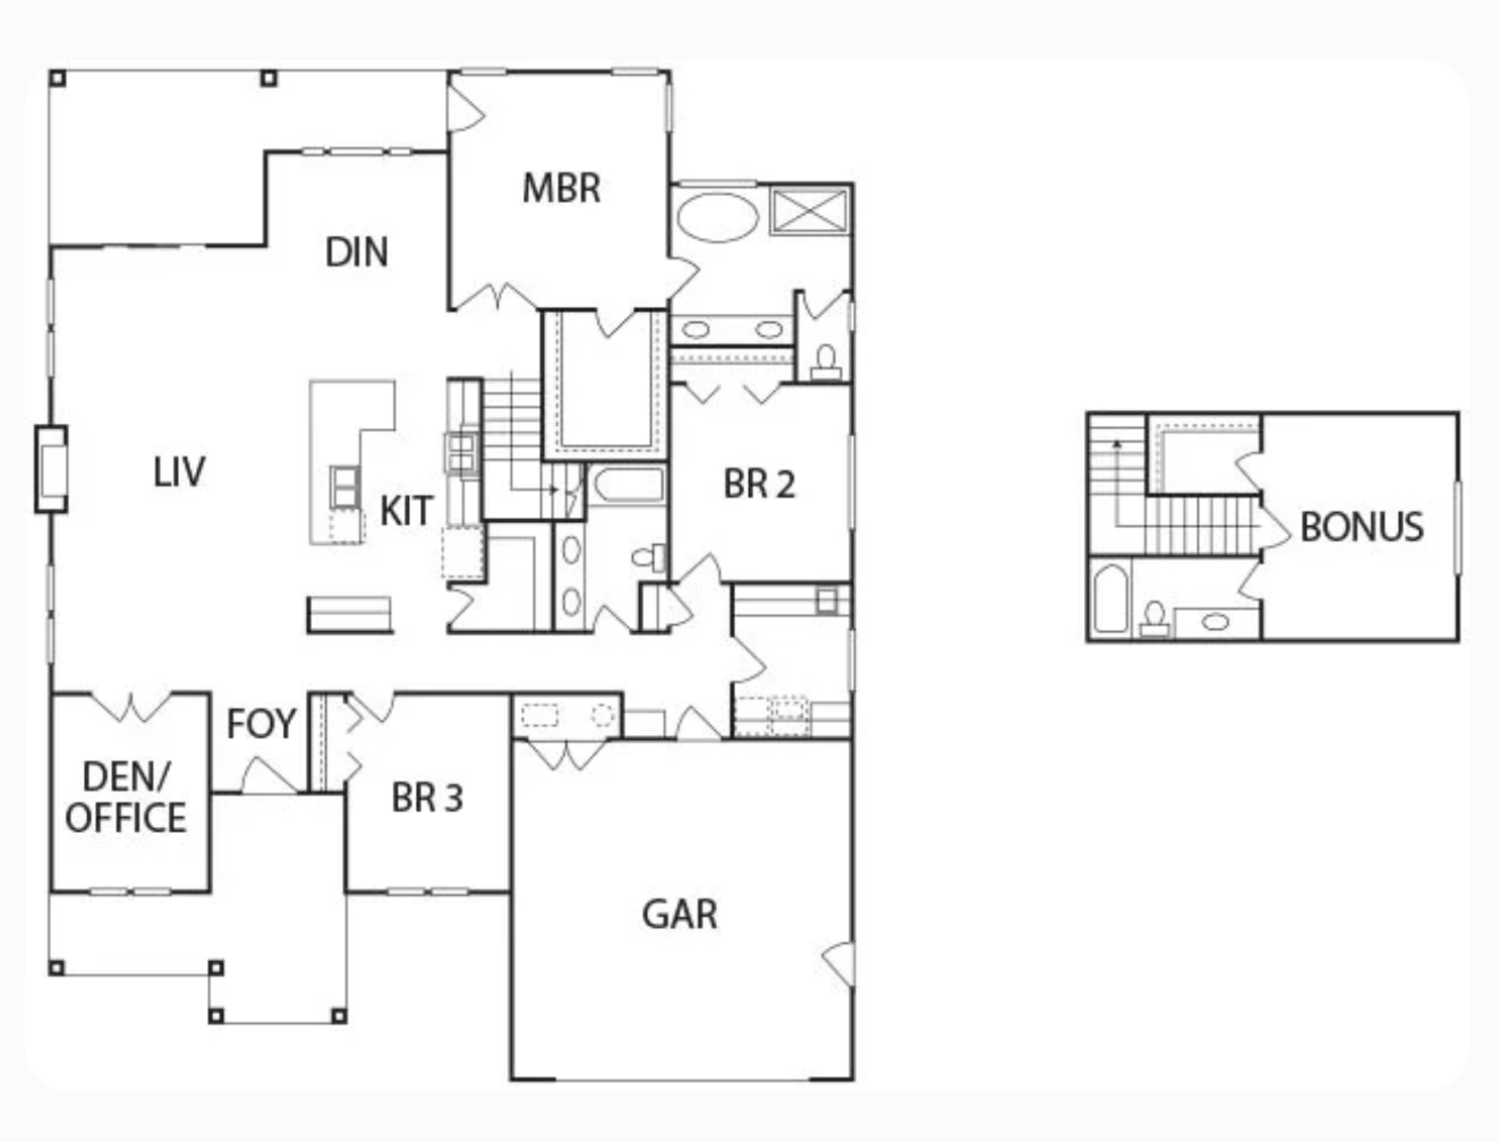 Building Layout With Room Notations